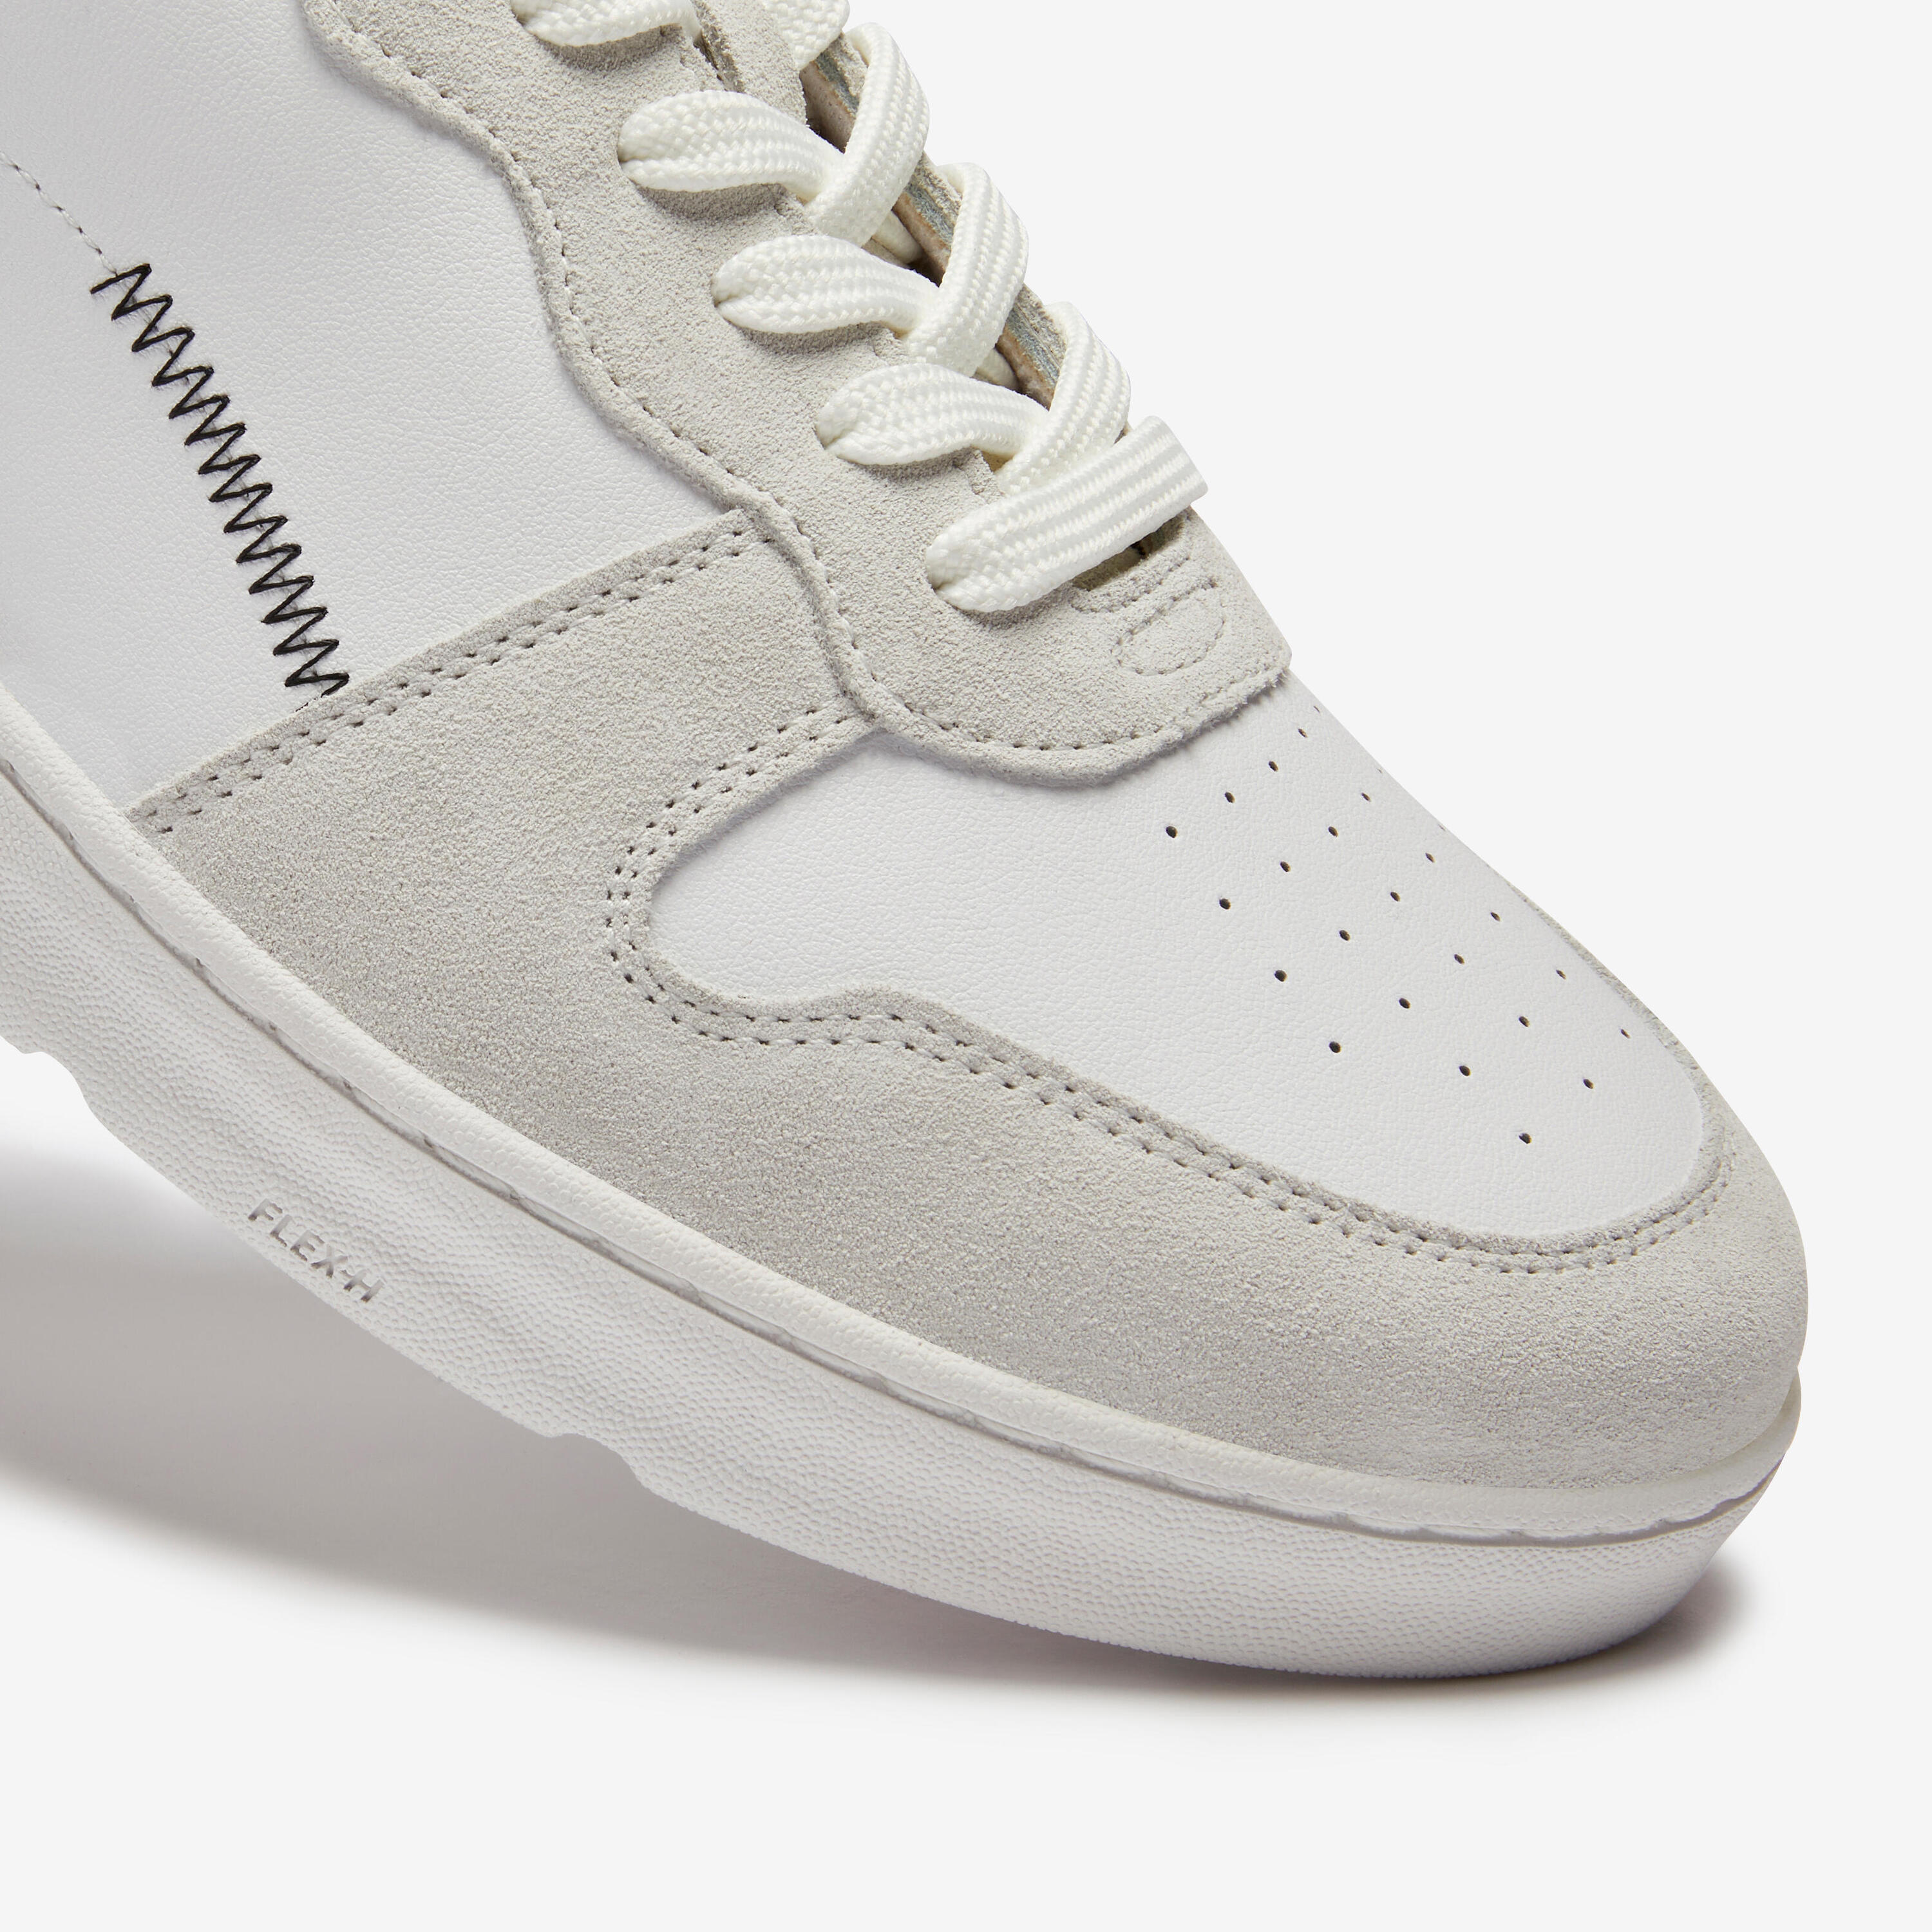 MEN'S WALK PROTECT LEATHER TRAINERS - WHITE 4/8